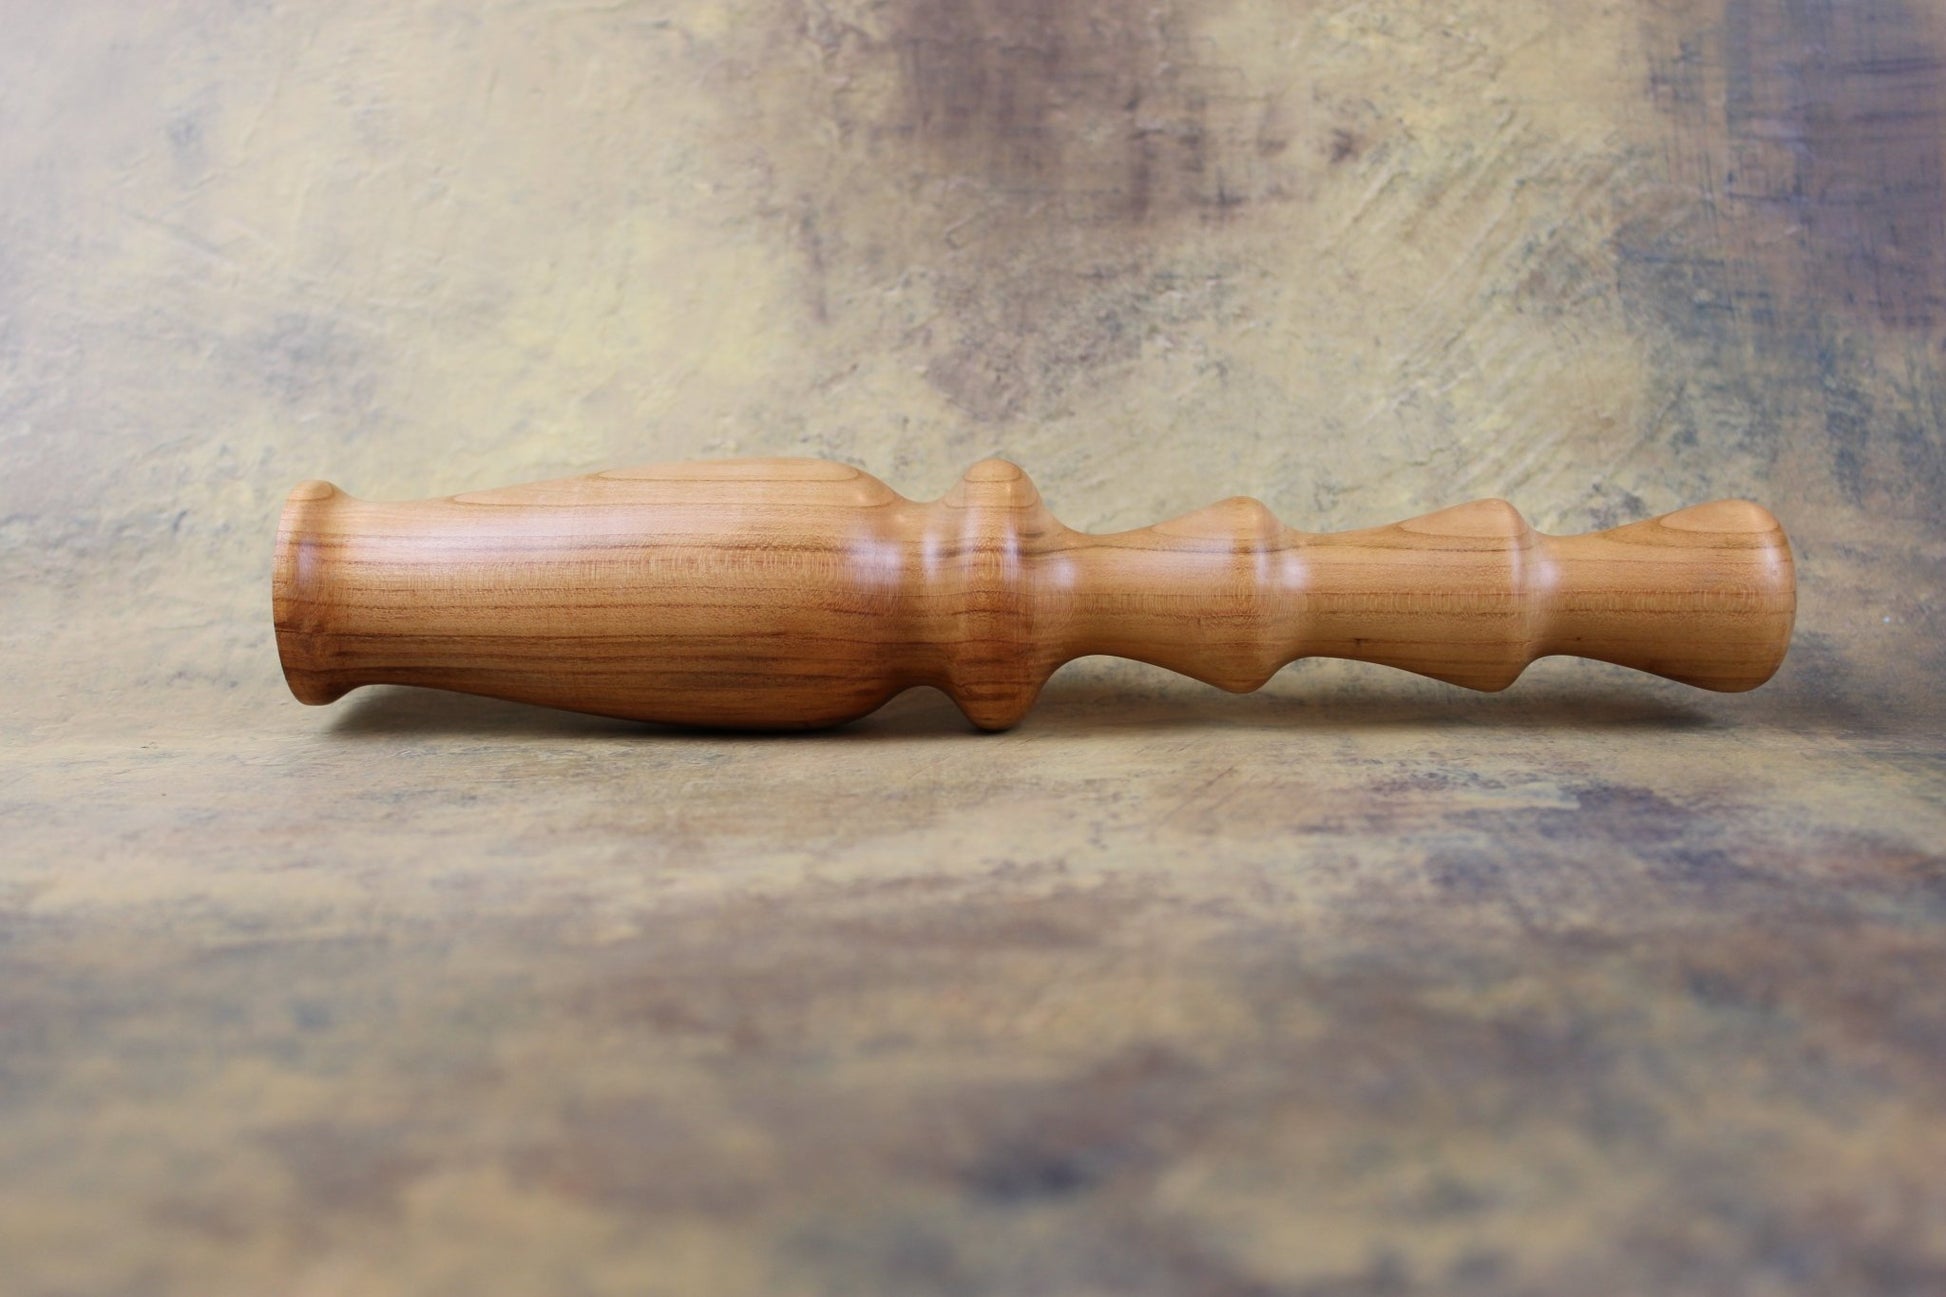 Hand Turned Cherry Wood Traditional Thistle Shaped Masher, Pounder, Tamper, Bruiser for Sauerkraut, Herbs, Potatoes ~ Fits Inside Regular Mouth Mason Jar - Blue Sage Family Farm